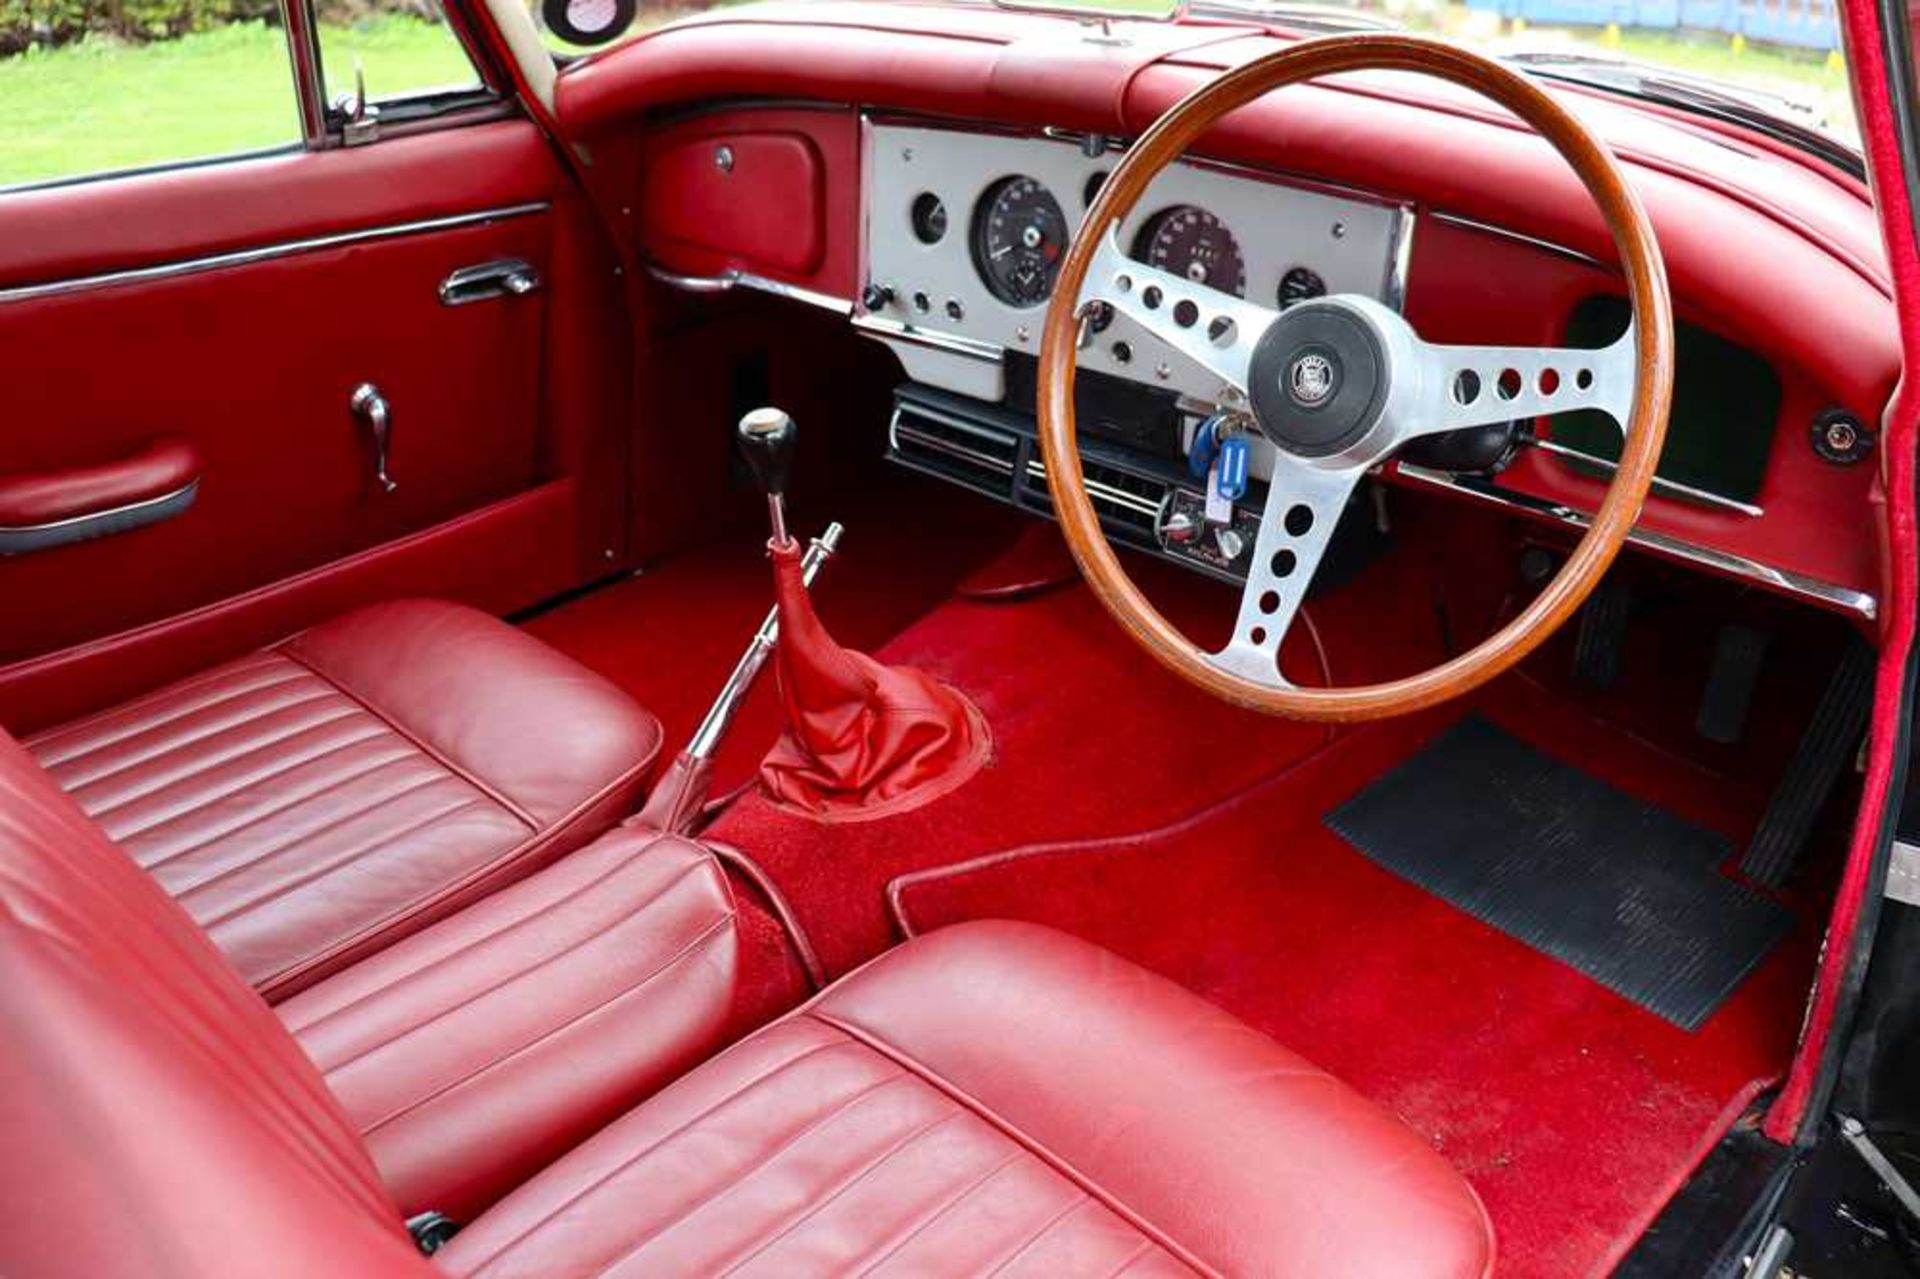 1959 Jaguar XK 150 Fixed Head Coupe 1 of just 1,368 RHD examples made - Image 16 of 49